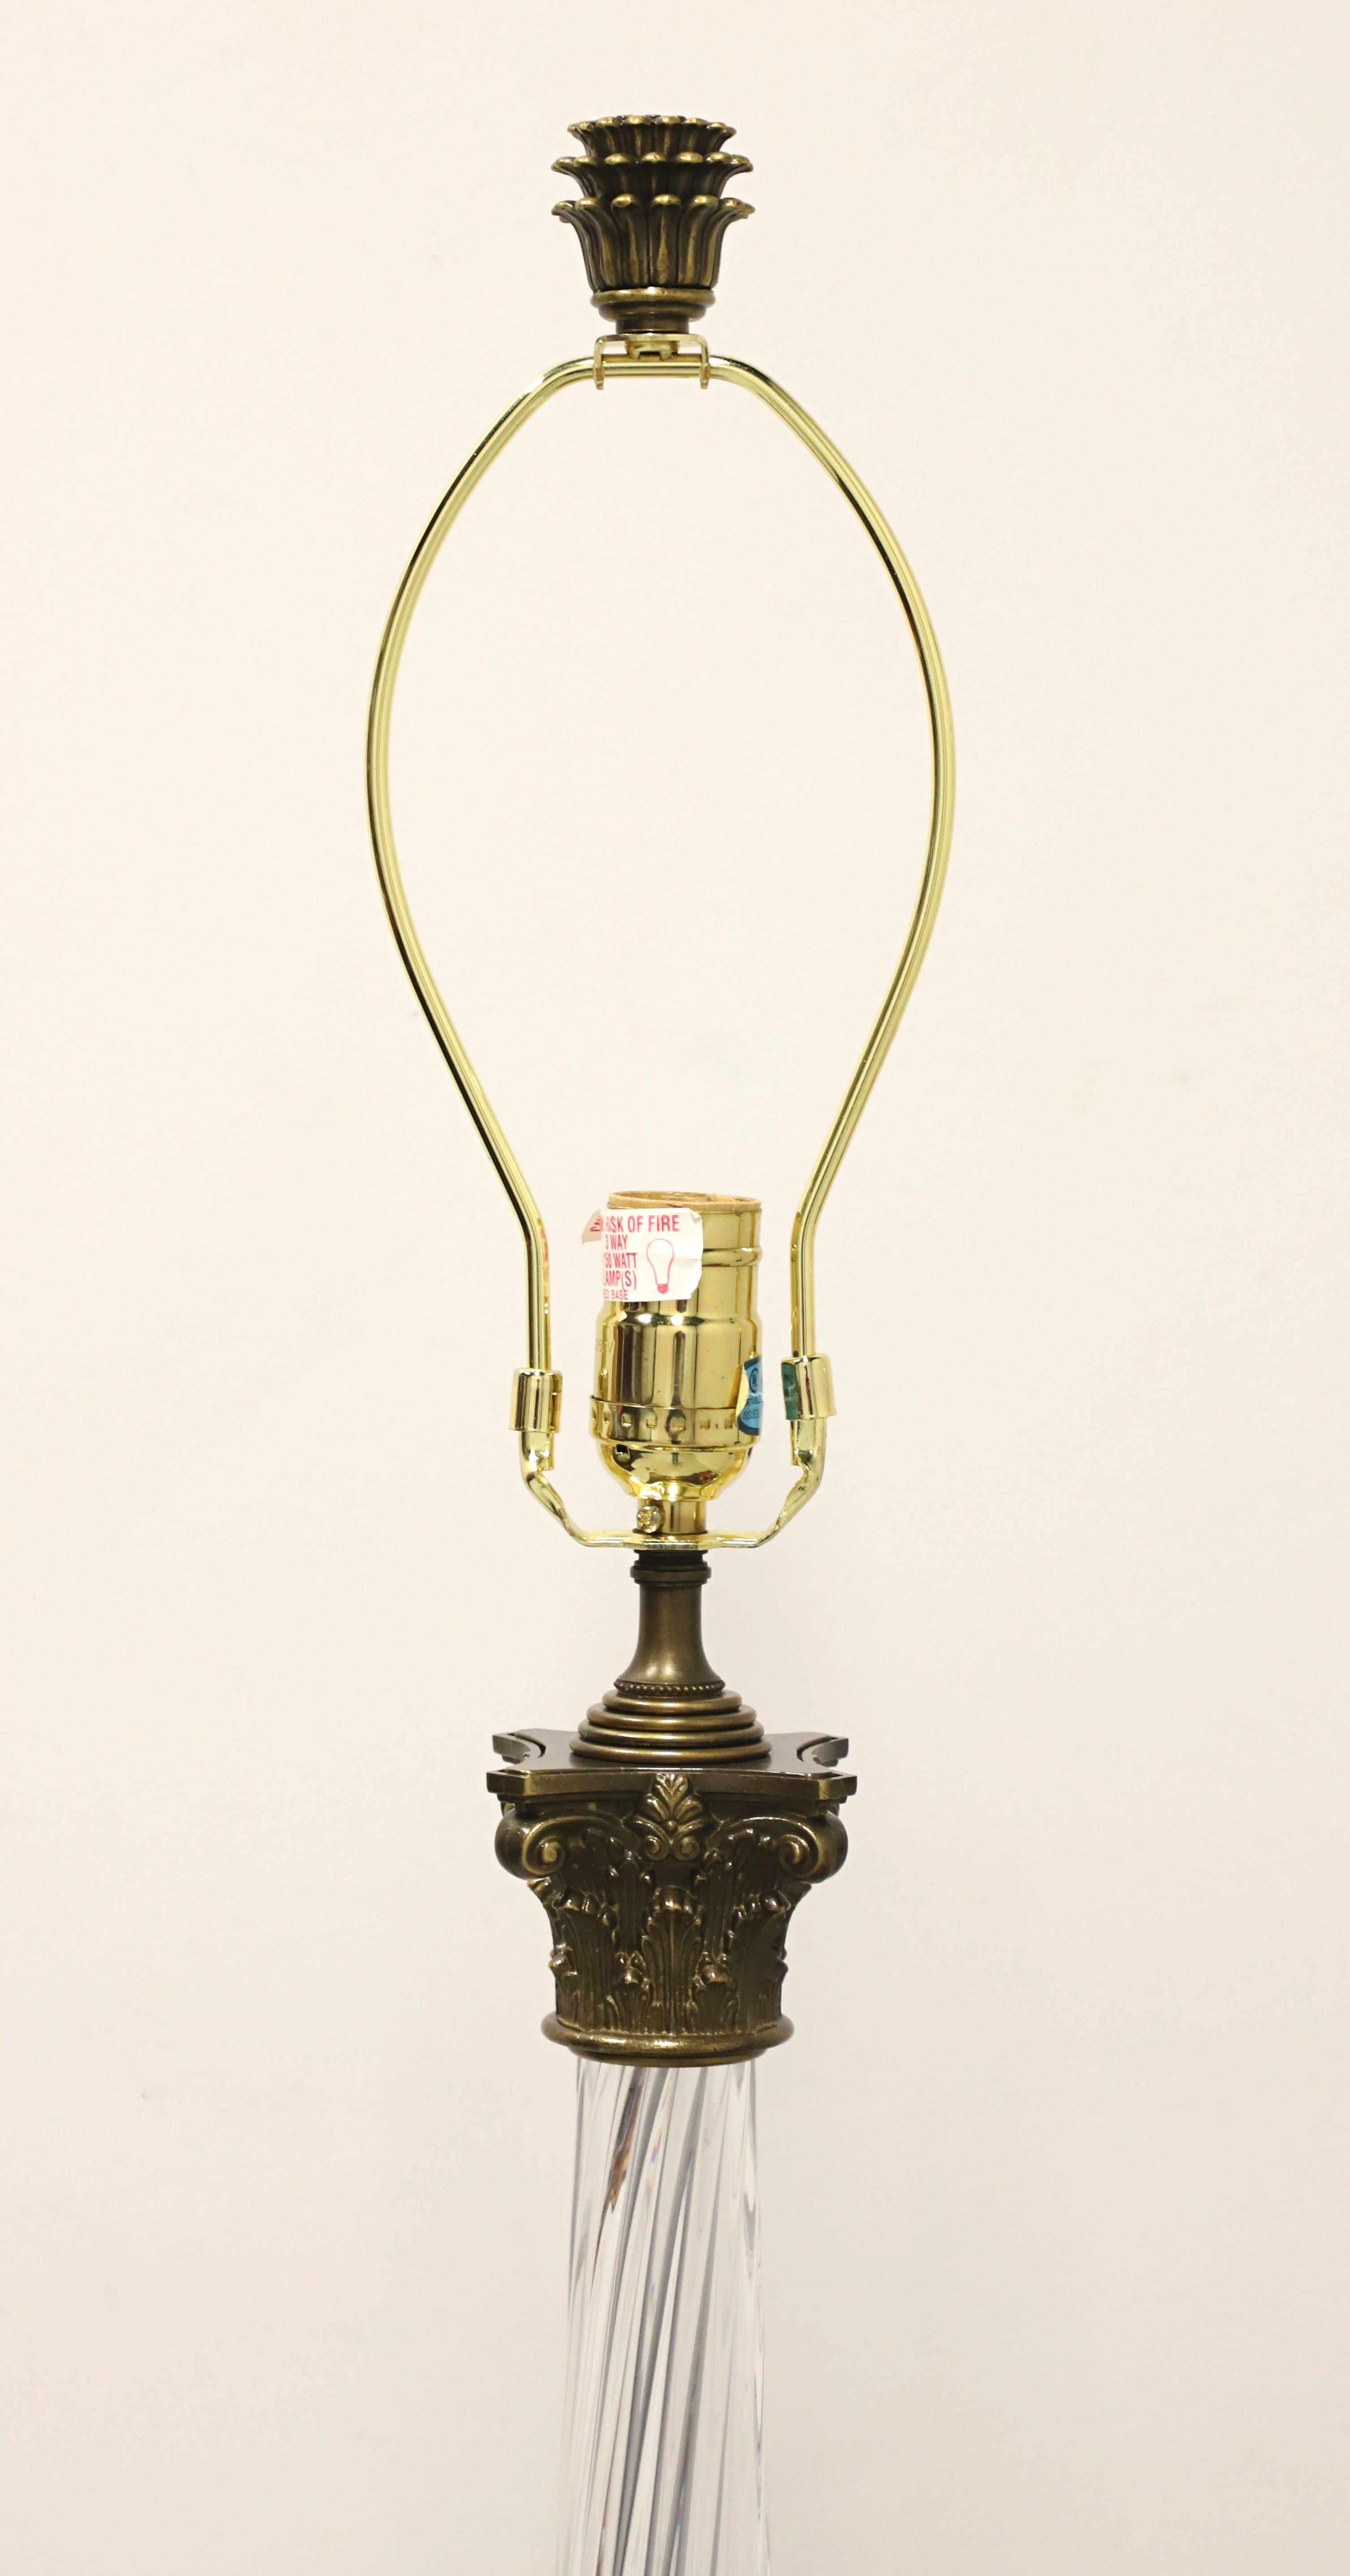 CHELSEA HOUSE Brass & Glass Traditional Table Lamps with Duckhead Feet - Pair In Good Condition For Sale In Charlotte, NC